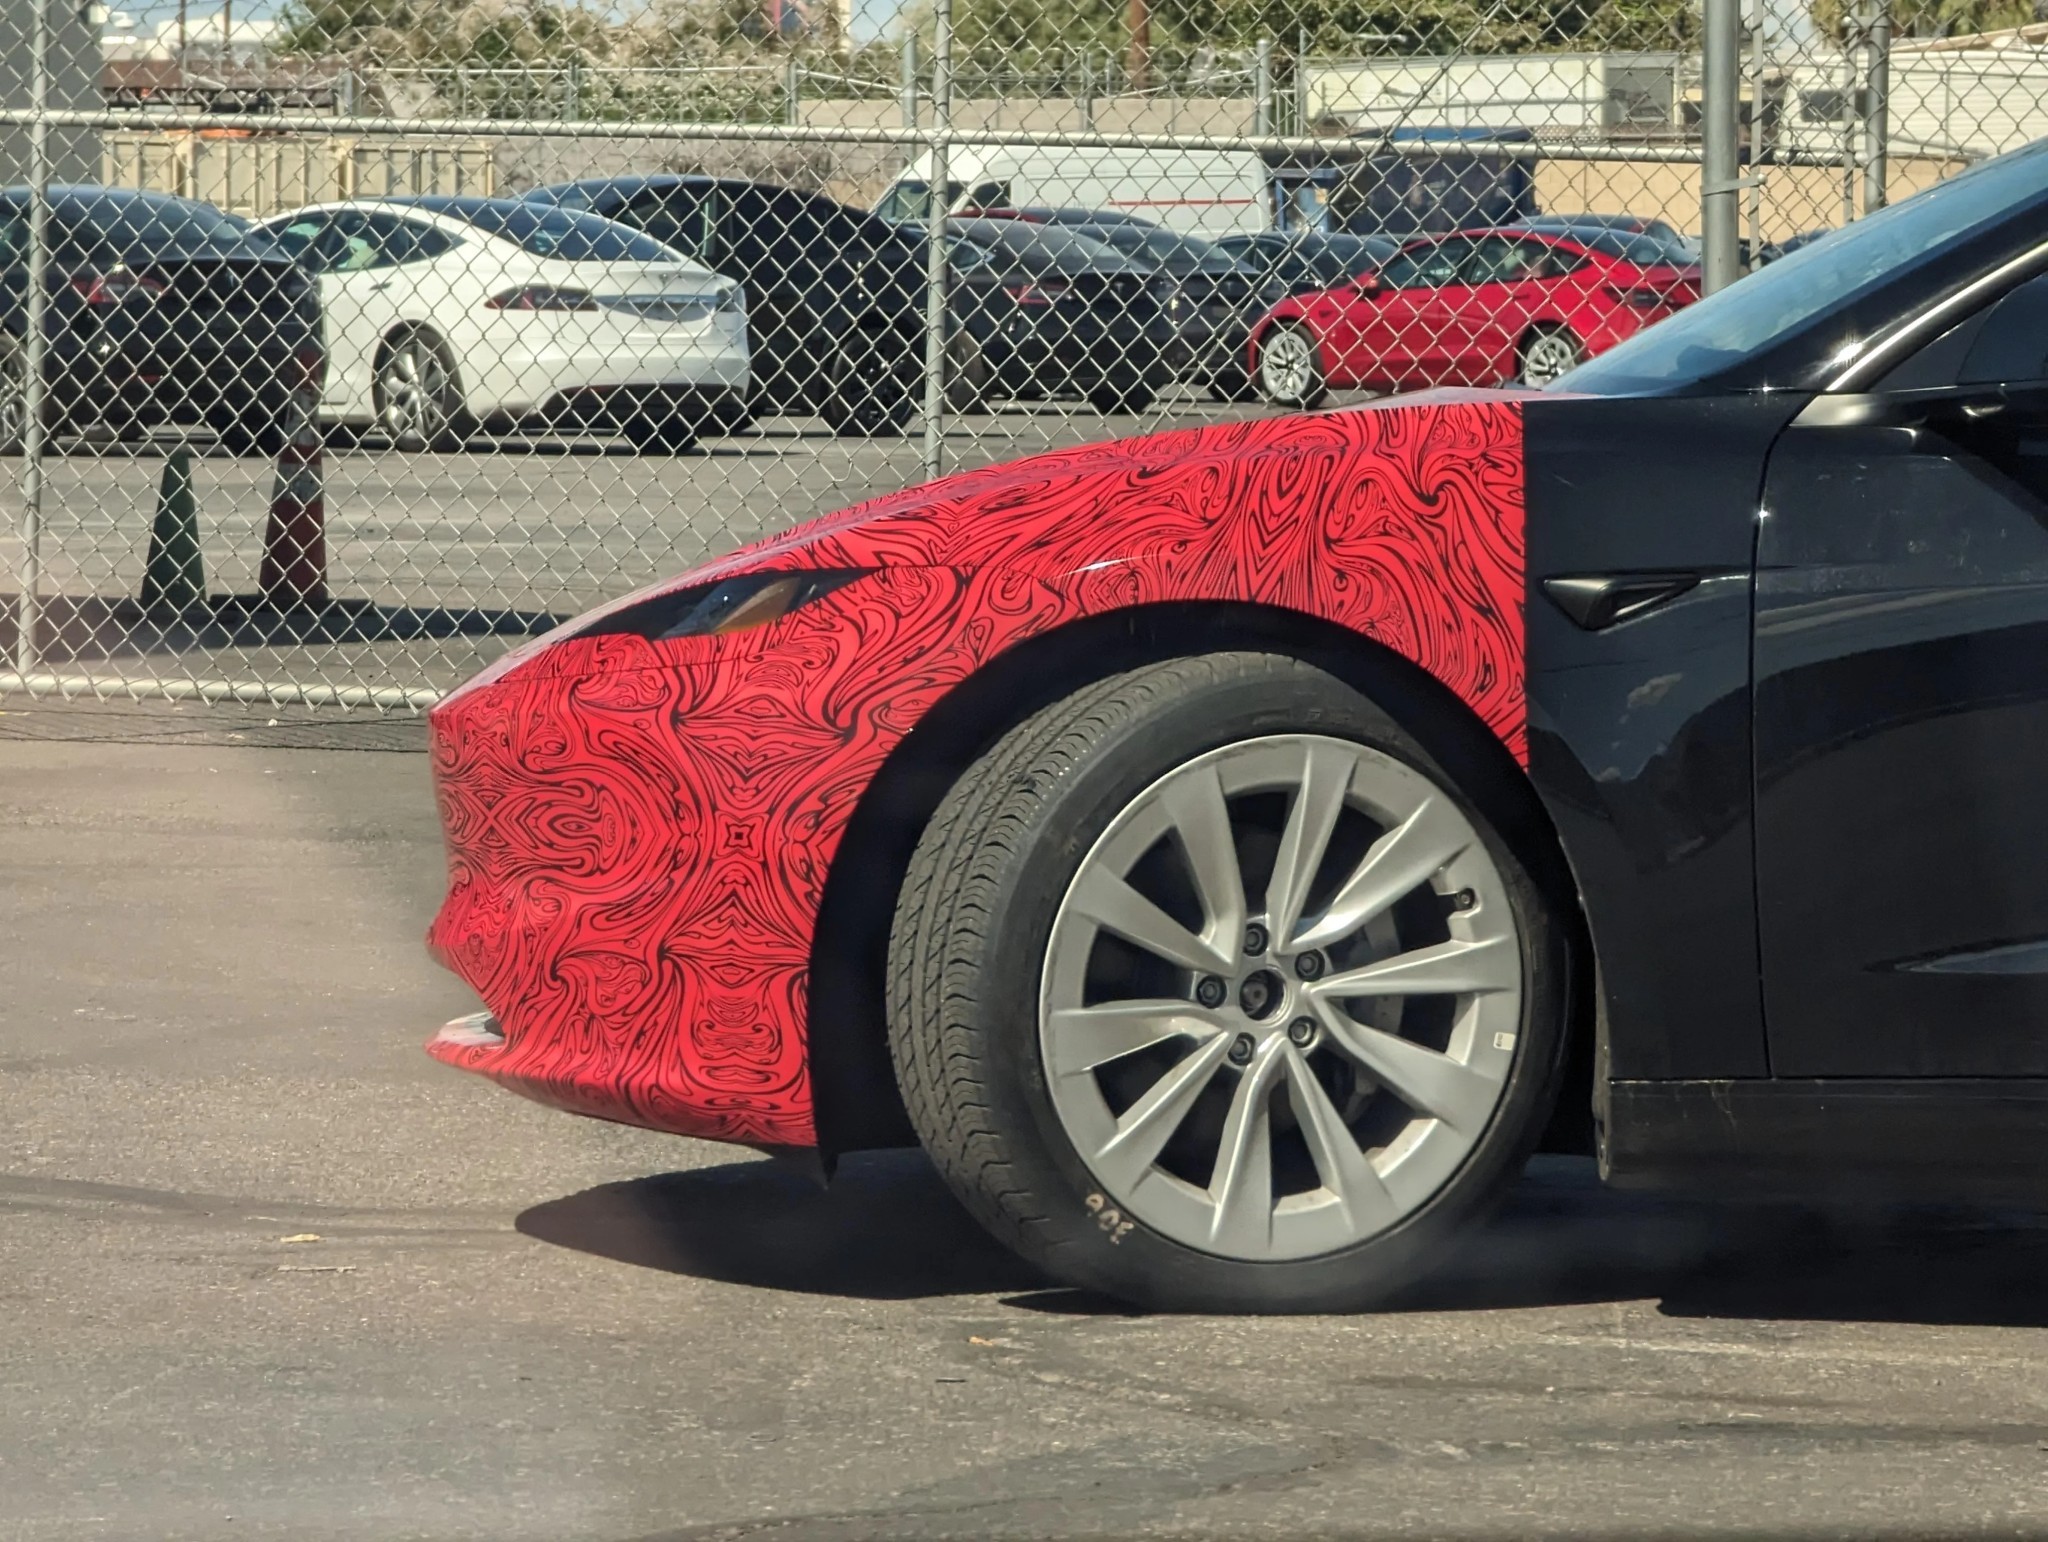 https://s1.cdn.autoevolution.com/images/news/gallery/ultra-red-tesla-model-3-highland-performance-spotted-with-red-brake-calipers_4.jpg